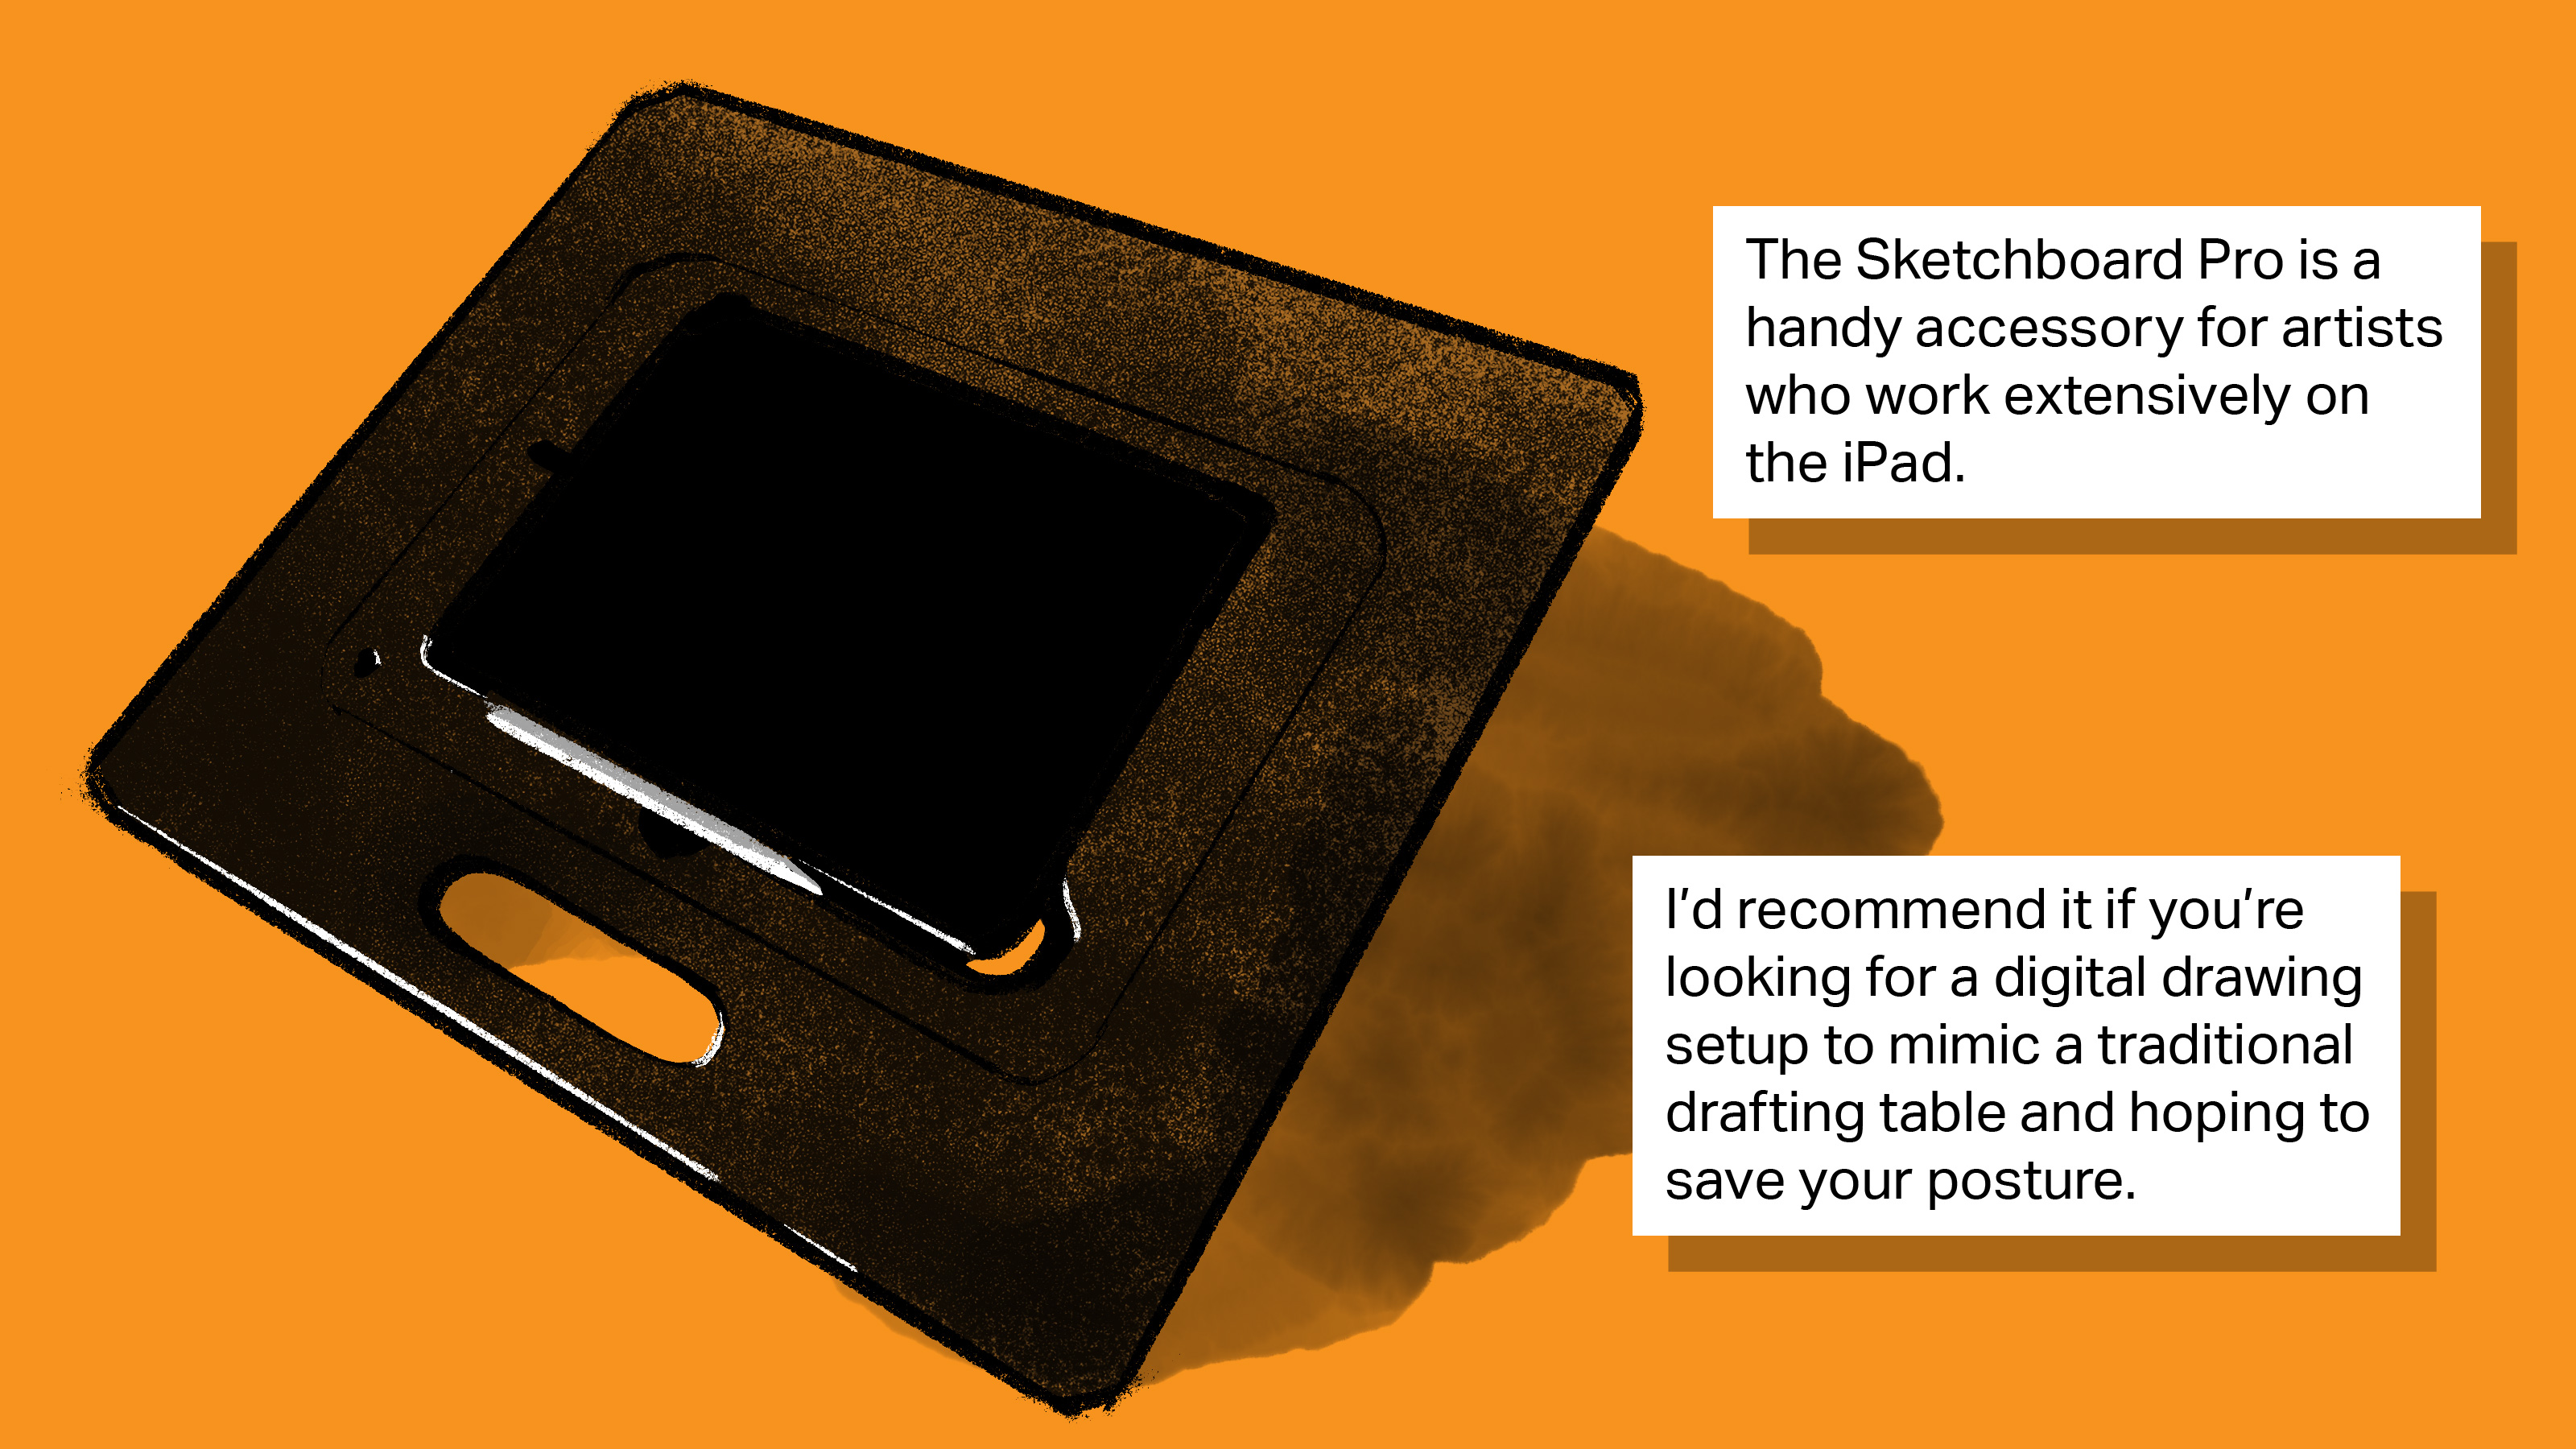 [text] The Sketchboard Pro is a handy accessory for artists who work extensively on the iPad. I’d recommend it if you’re looking for a digital drawing setup to mimic a traditional drafting table and hoping to save your posture. [image: an illustration of the Sketchboard Pro]